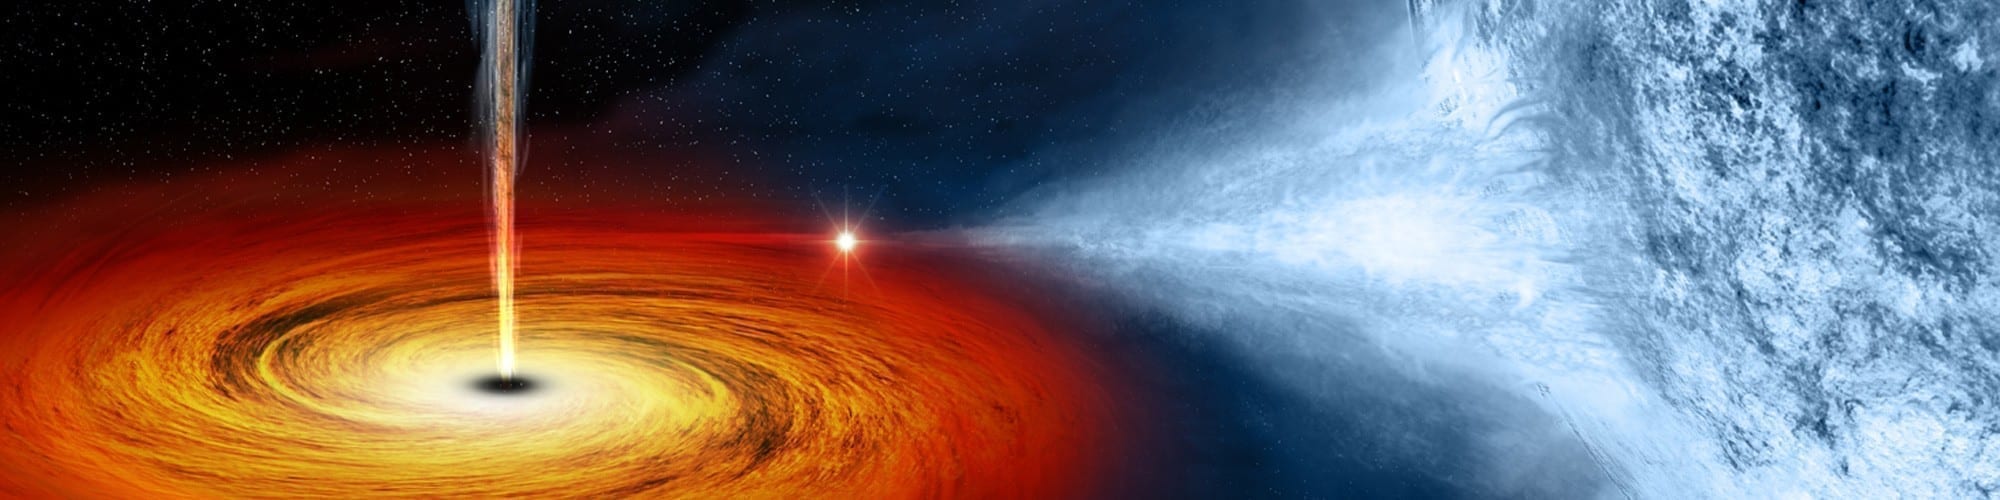 Mining energy from black holes - but don't hold your breath